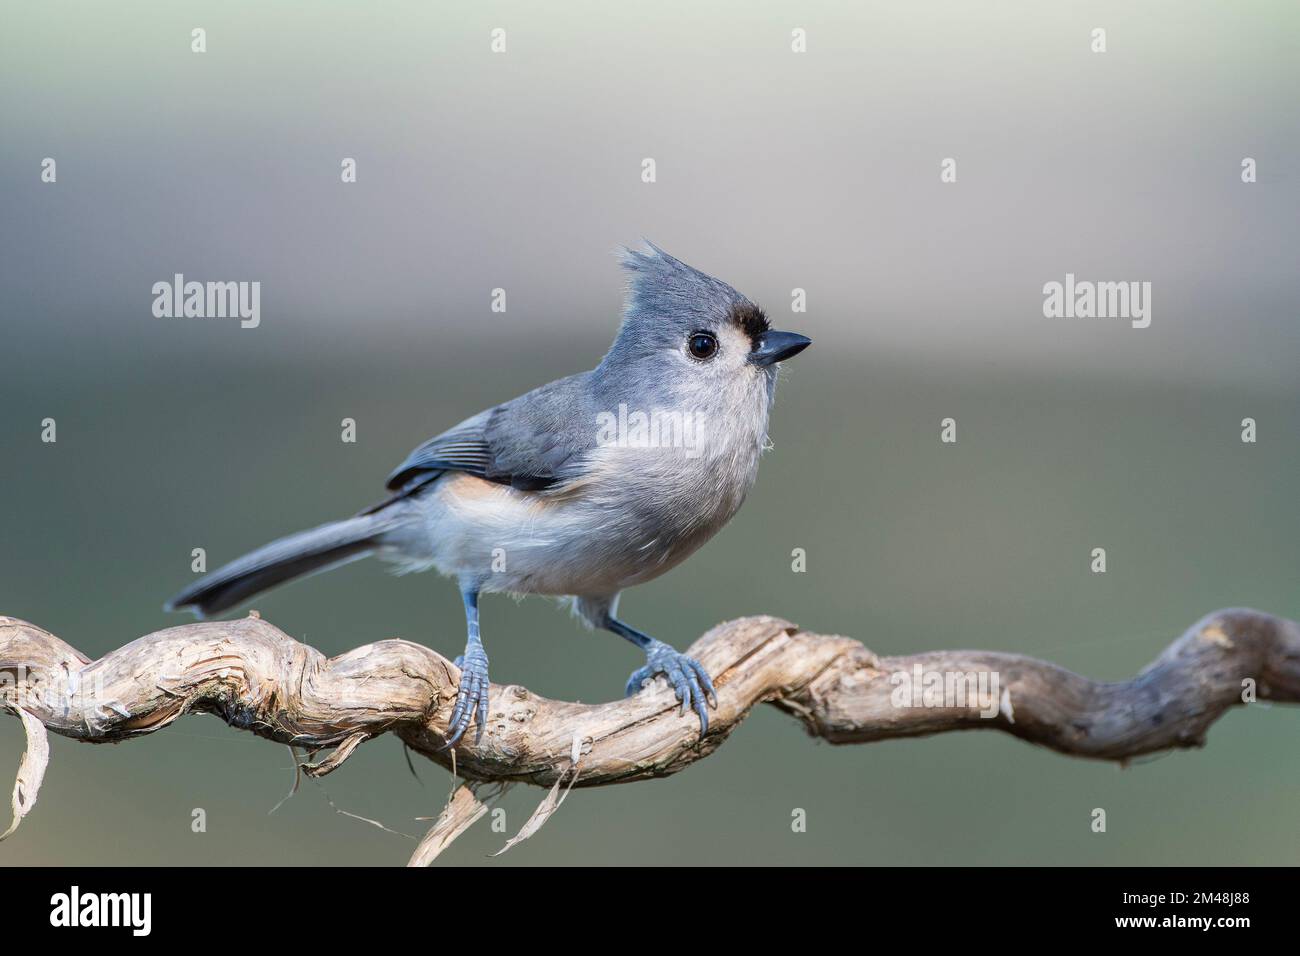 Tufted Titmouse Perched on Twisted Vine in South Central Louisiana Stock Photo